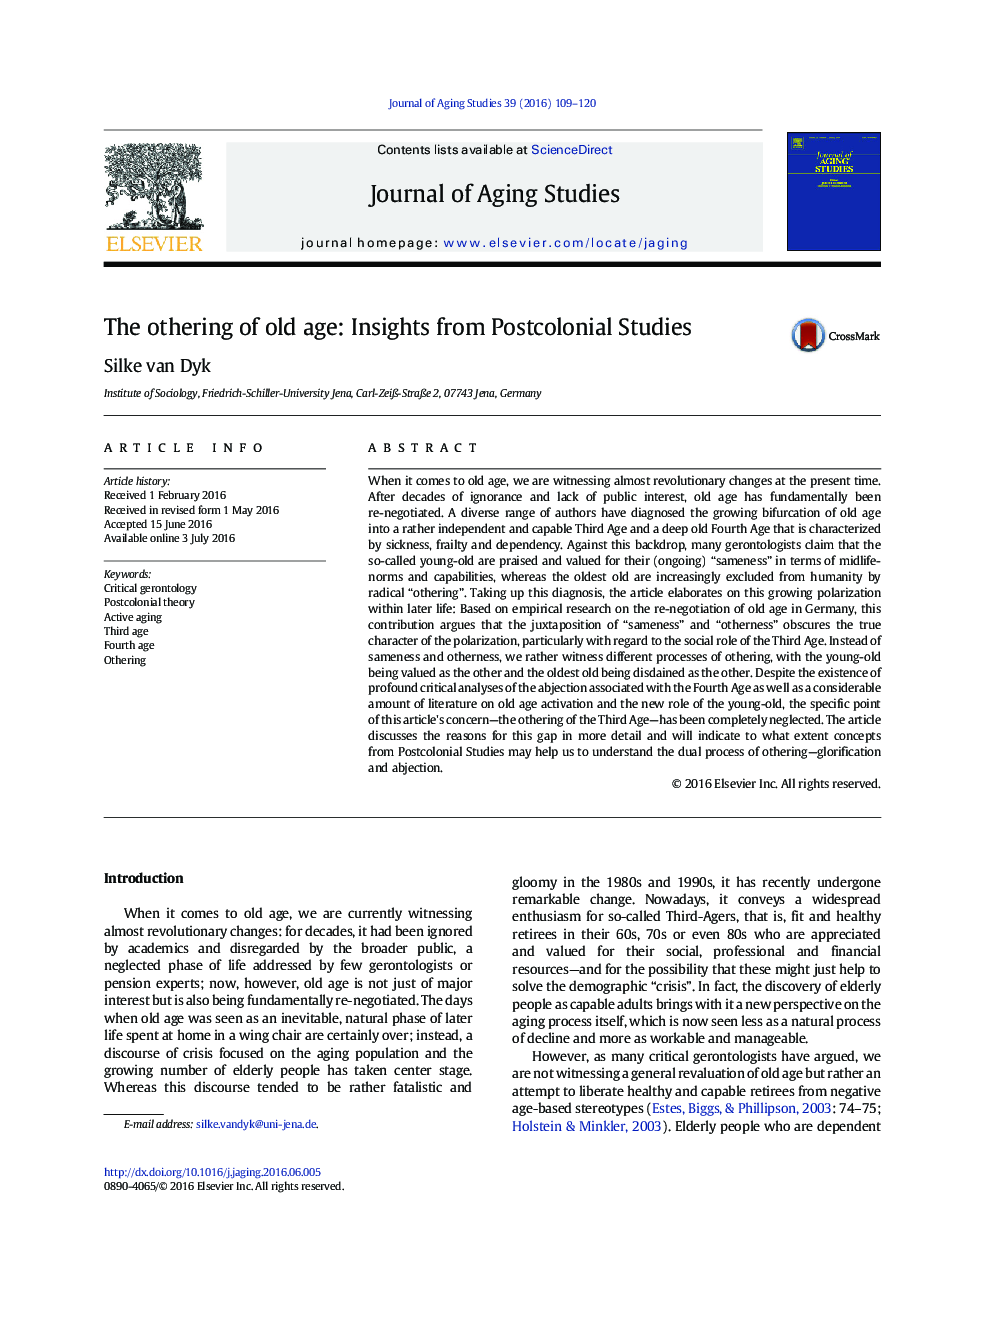 The othering of old age: Insights from Postcolonial Studies